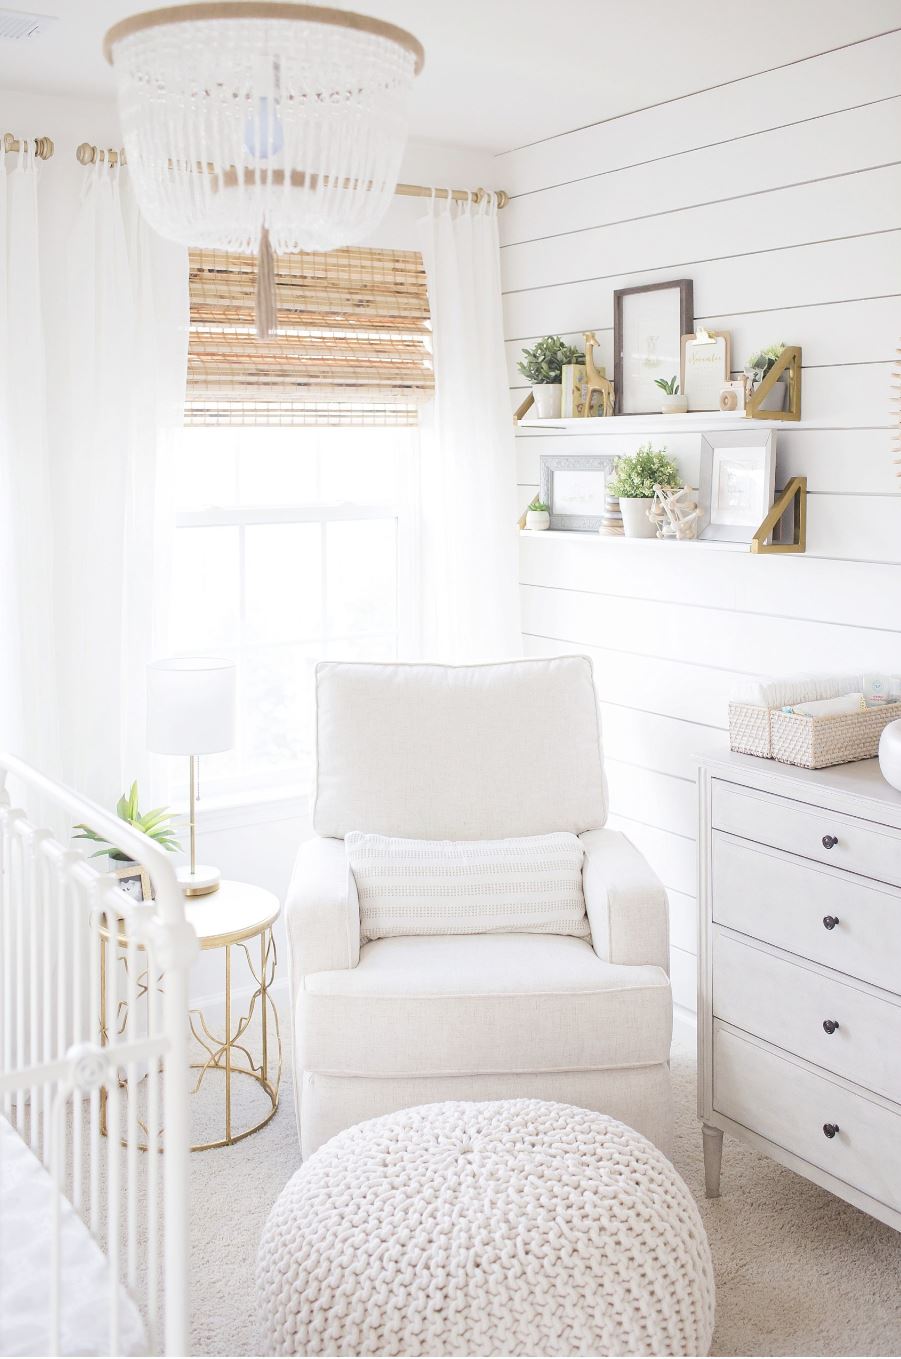 A gender neutral baby nursery with a shiplap accent wall, cozy recliner, crib, and dresser.